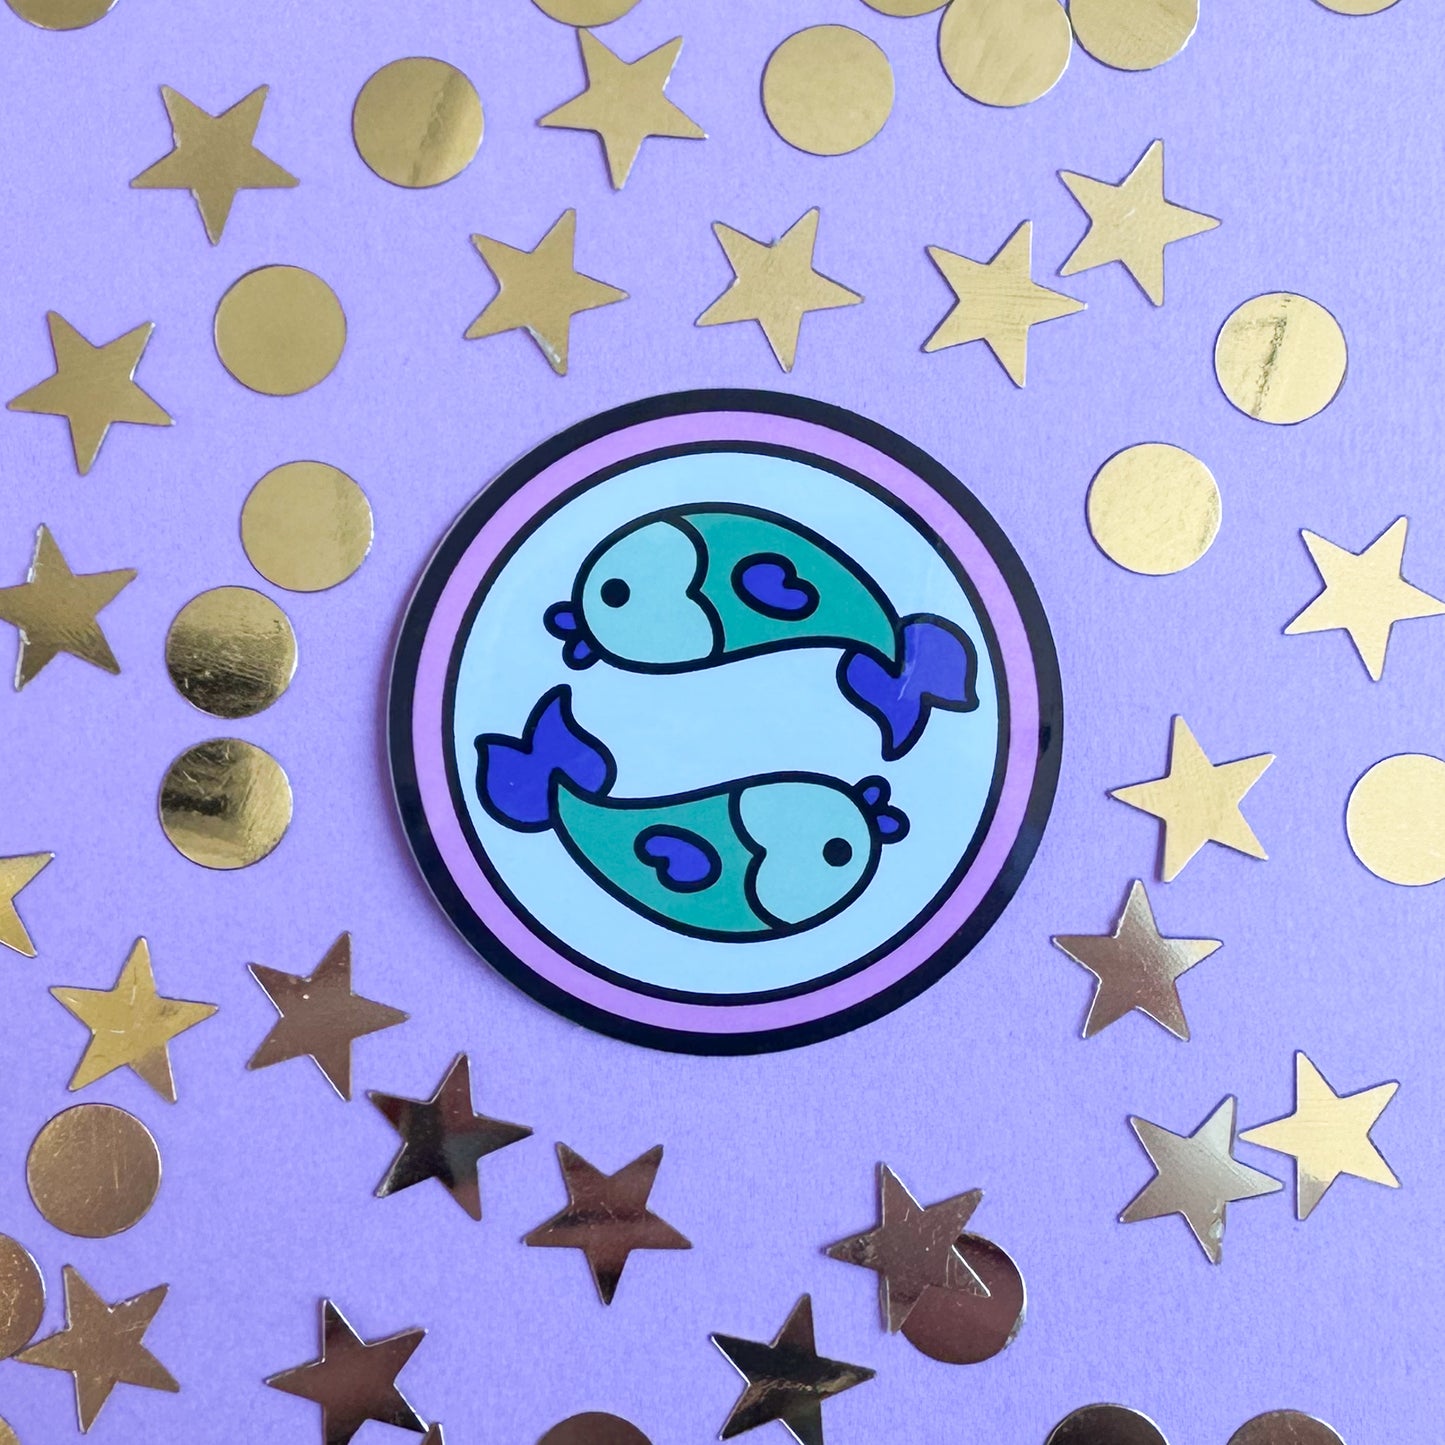 A circle sticker with two fish representing the Pisces zodiac sign. The sticker is on a purple background that has gold confetti in star and circle shapes around it. 